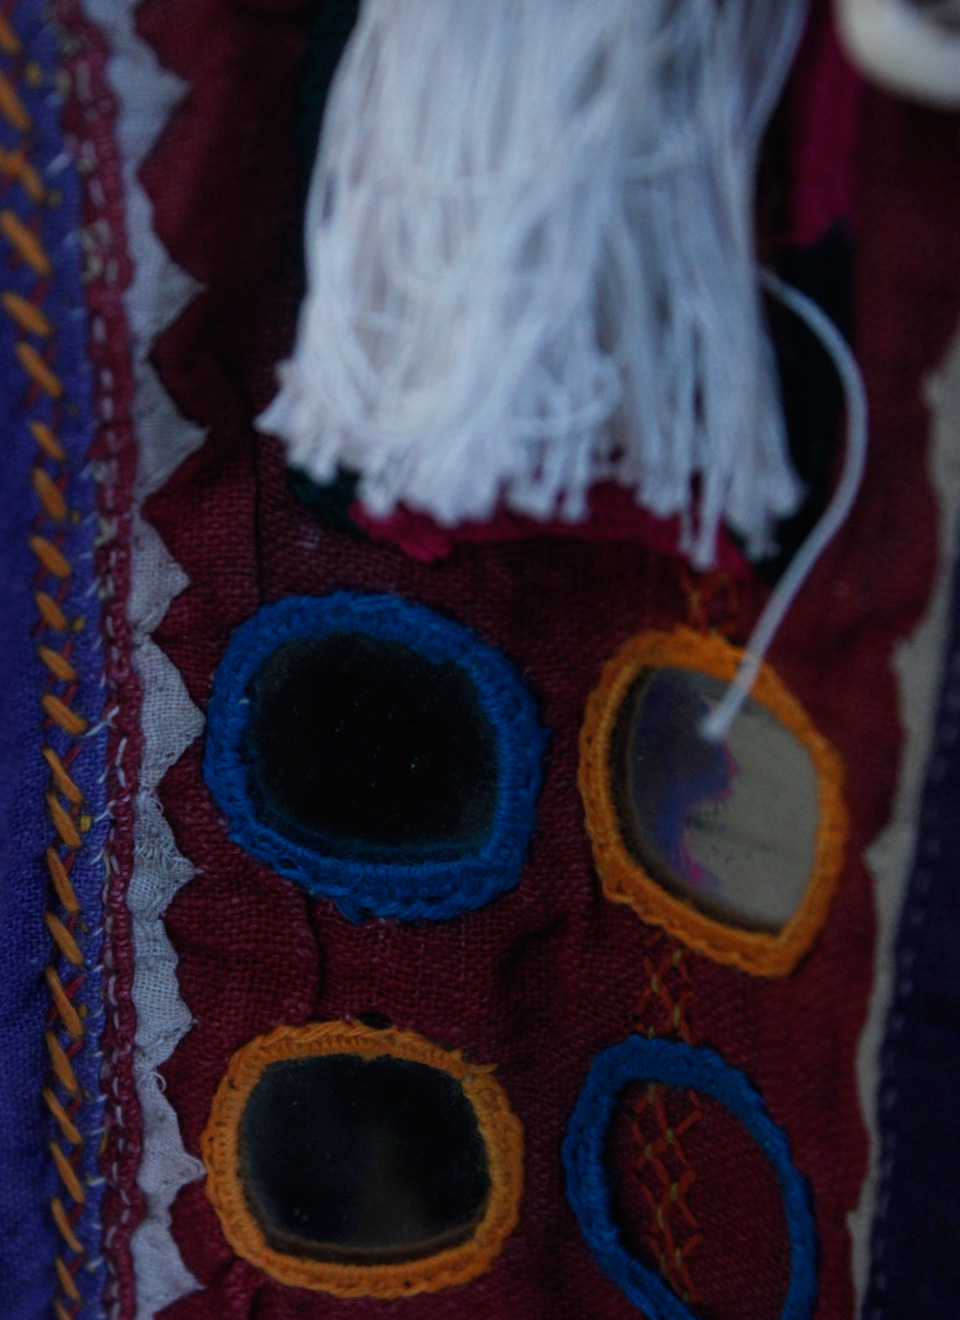 a Gujarati mirrored border with tassels - these kind of traditional Indian embellishments are popular accessories.